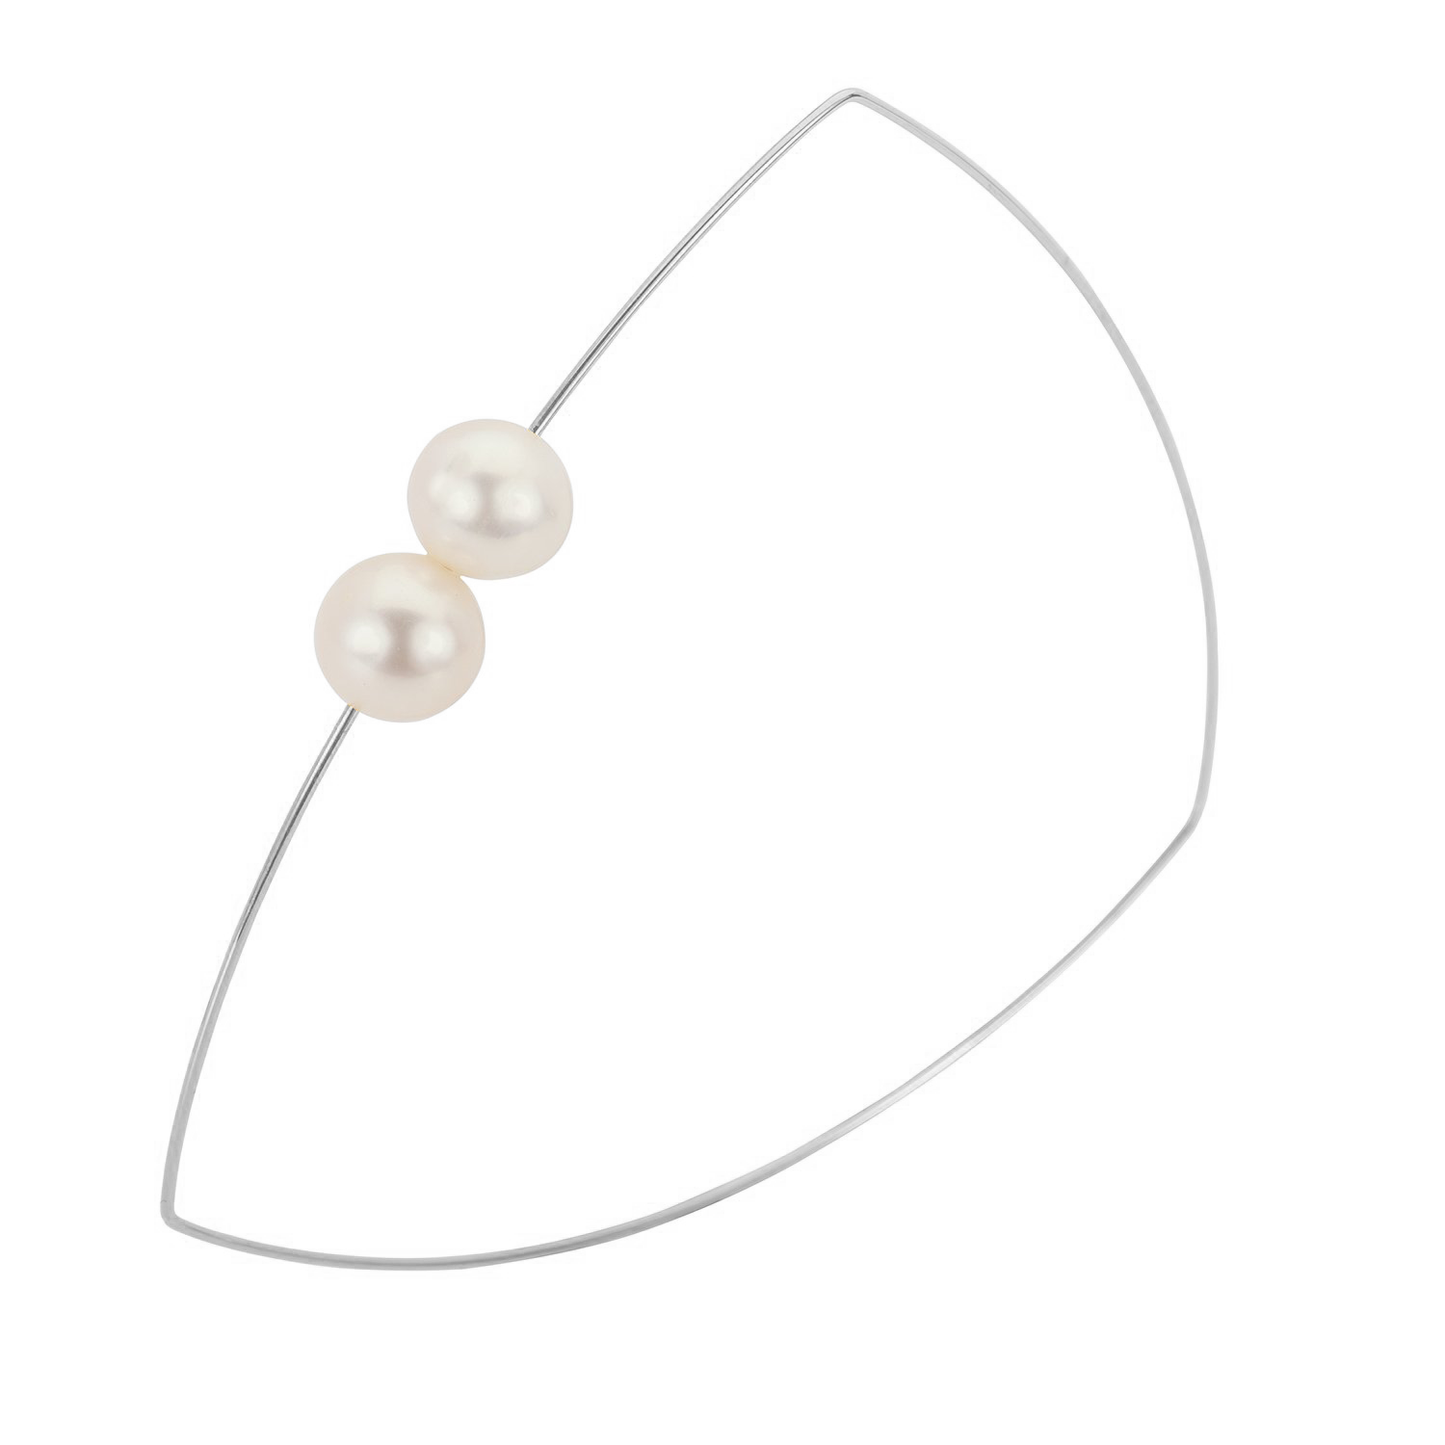 Triangle Bangle with Round Freshwater Pearls